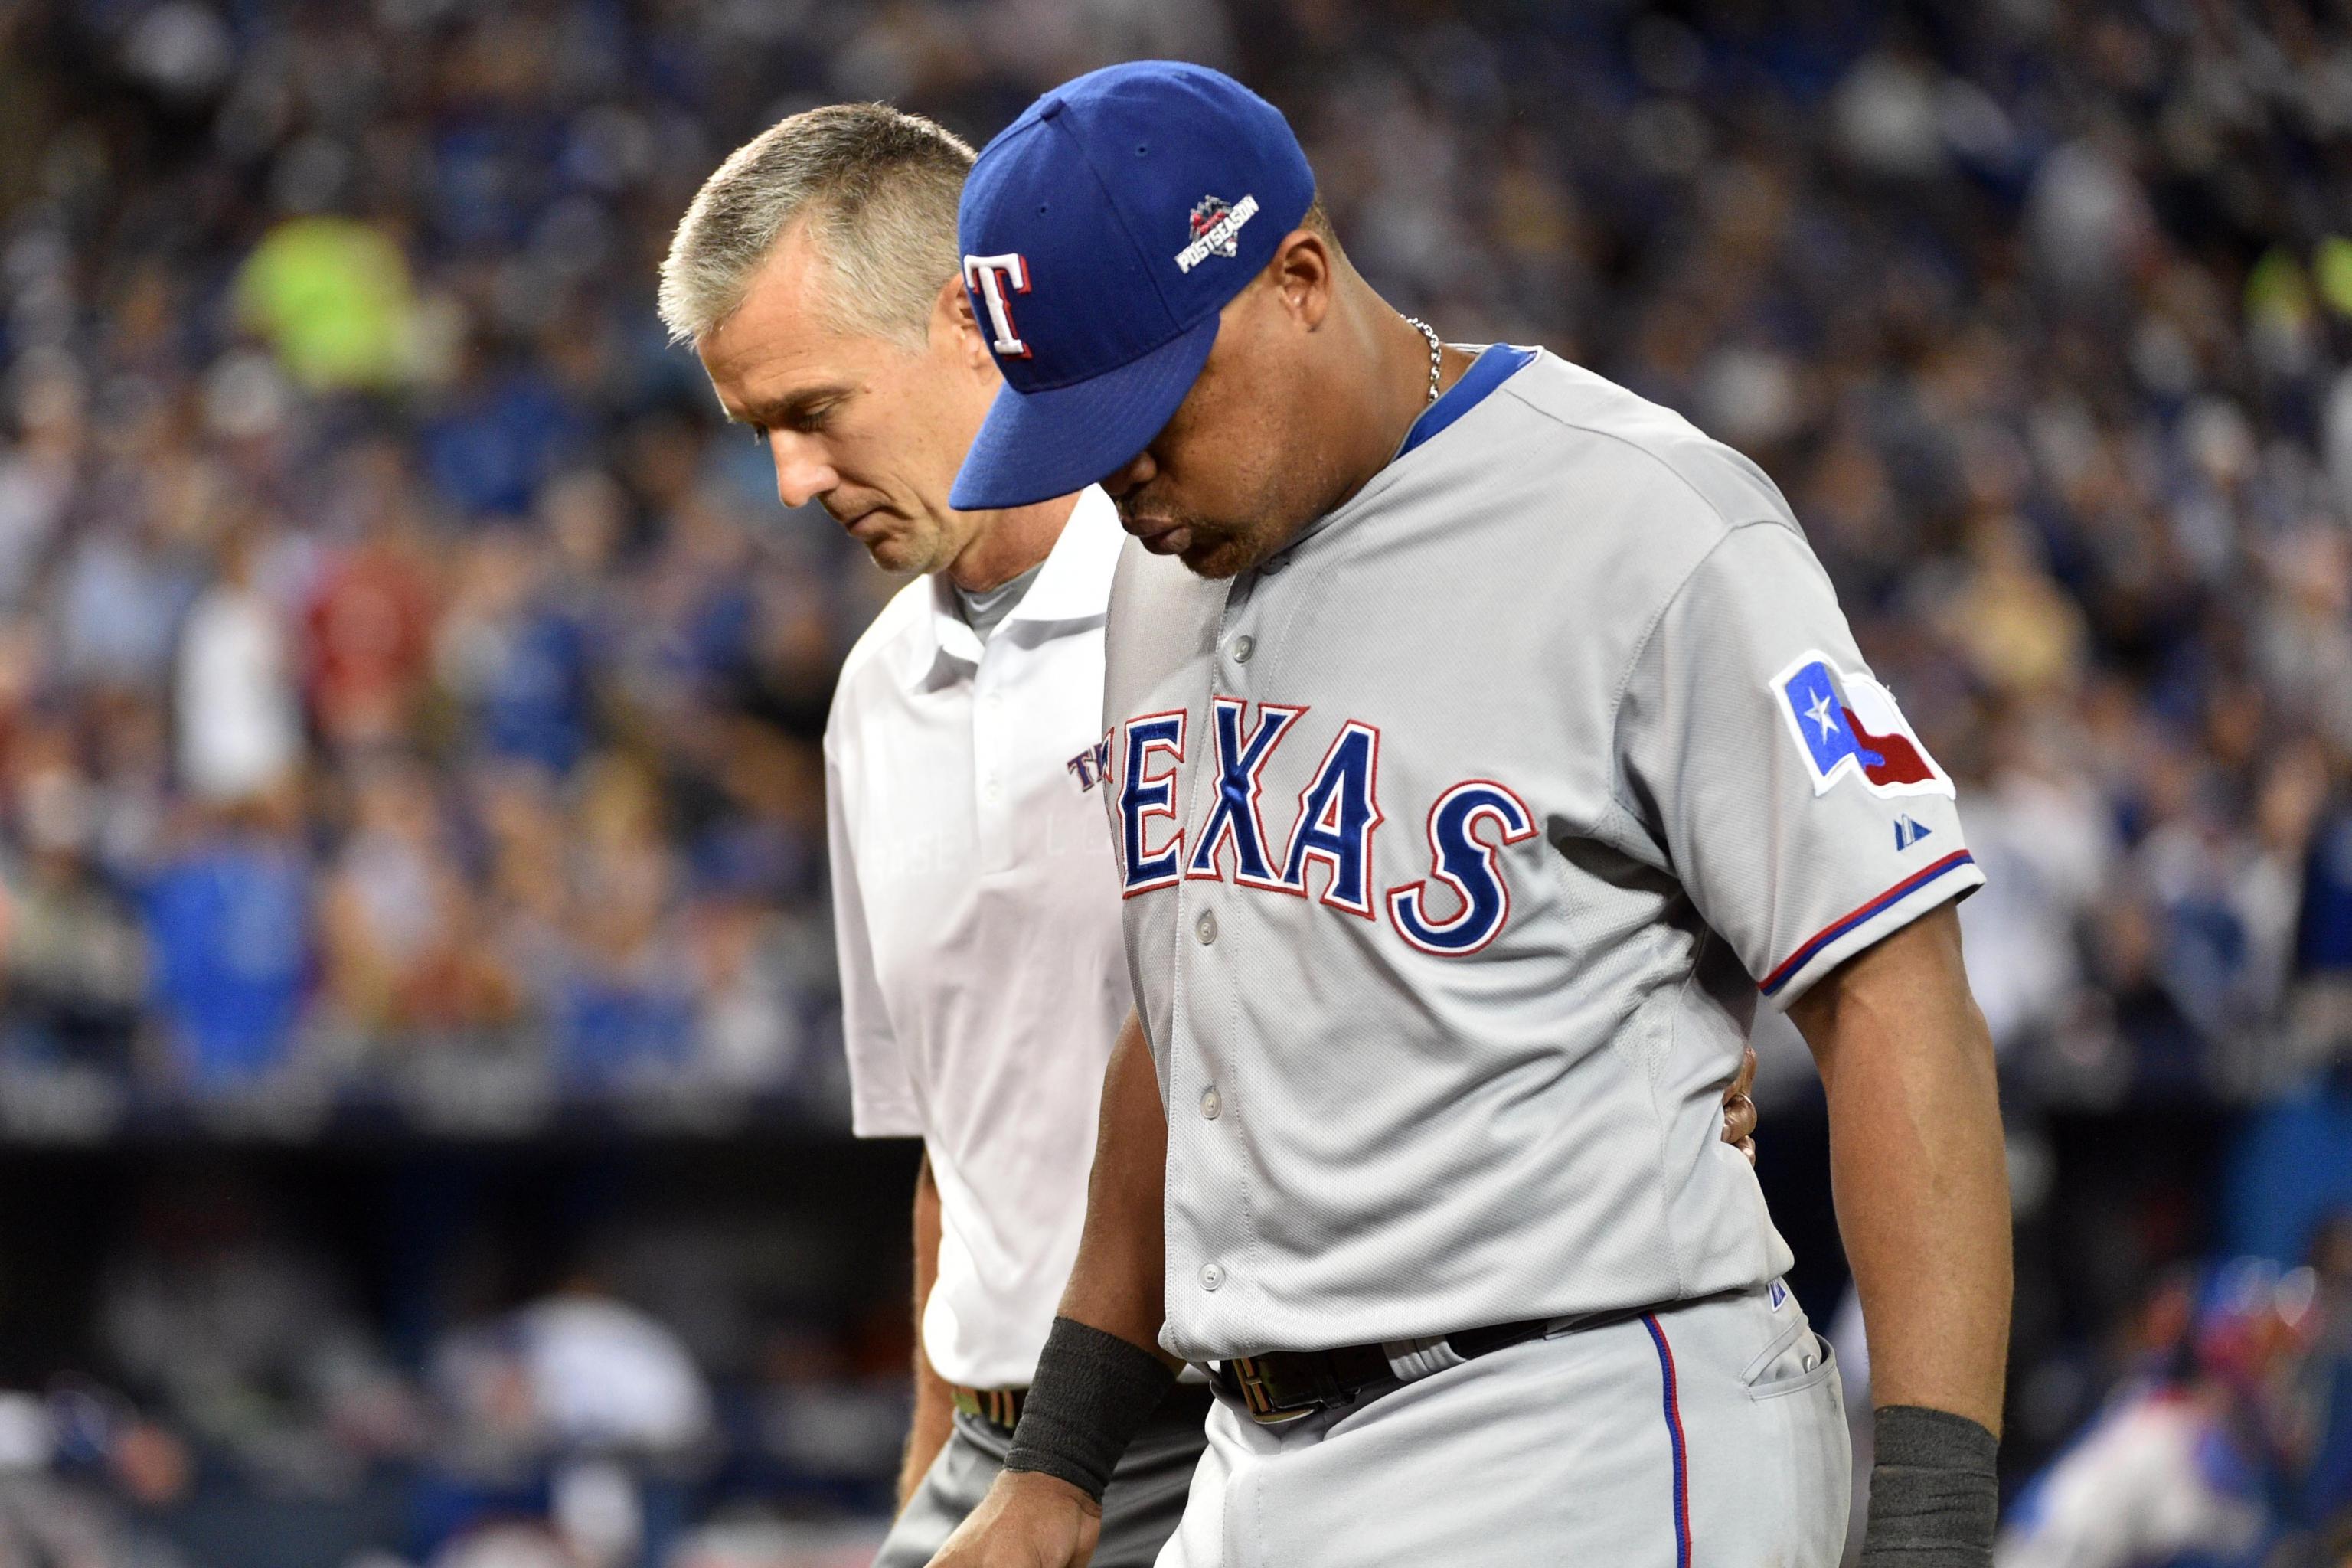 Was Adrian Beltre the right choice? - Beyond the Box Score